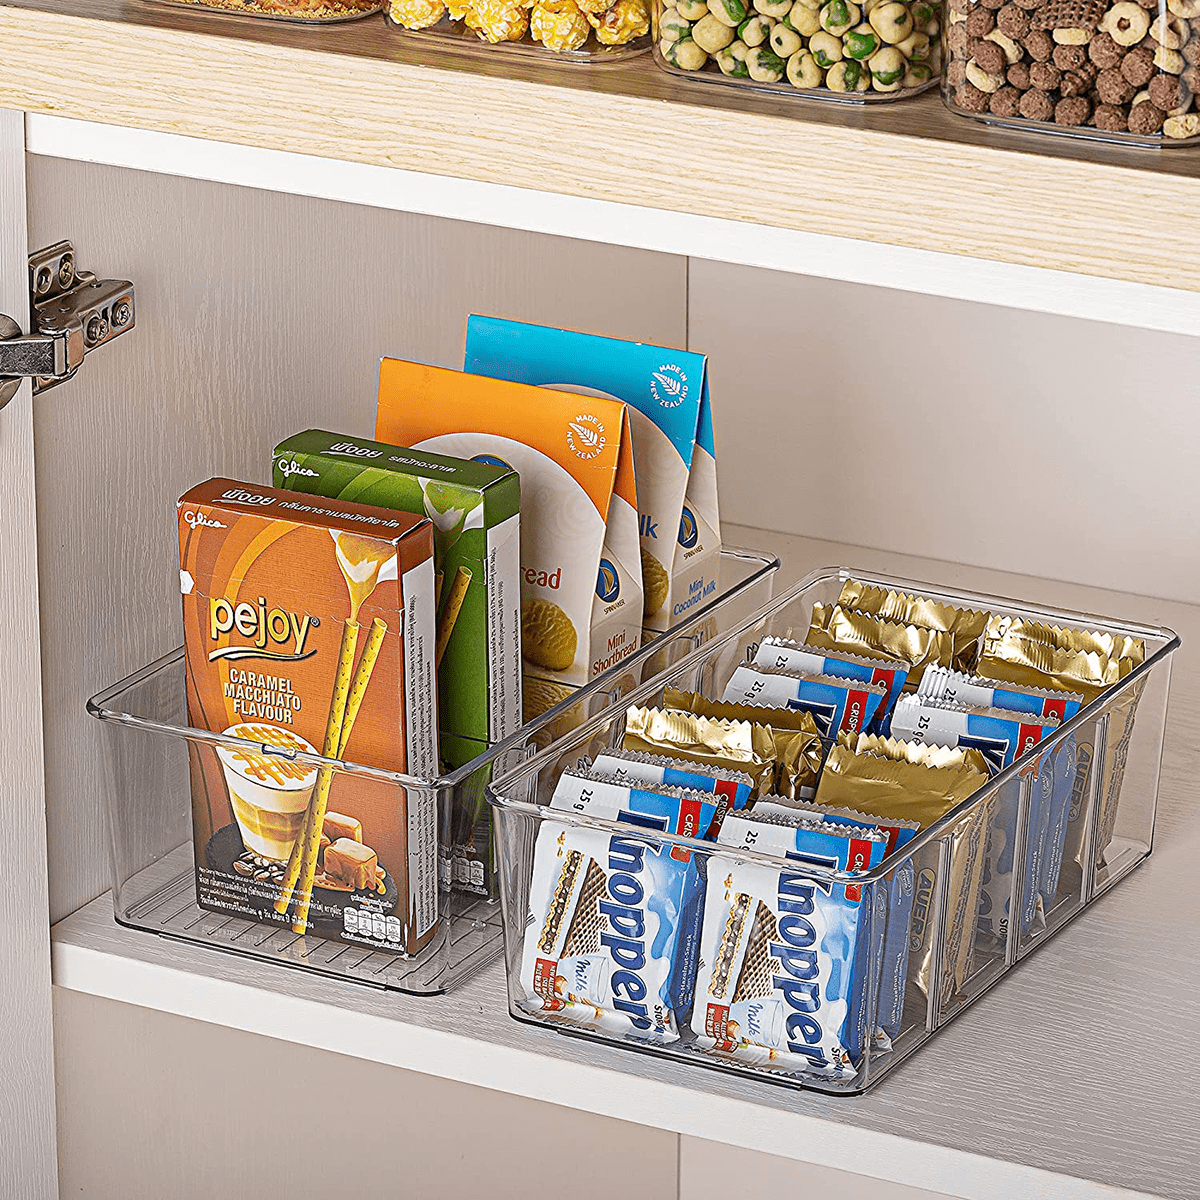  Storage Bin With Dividers